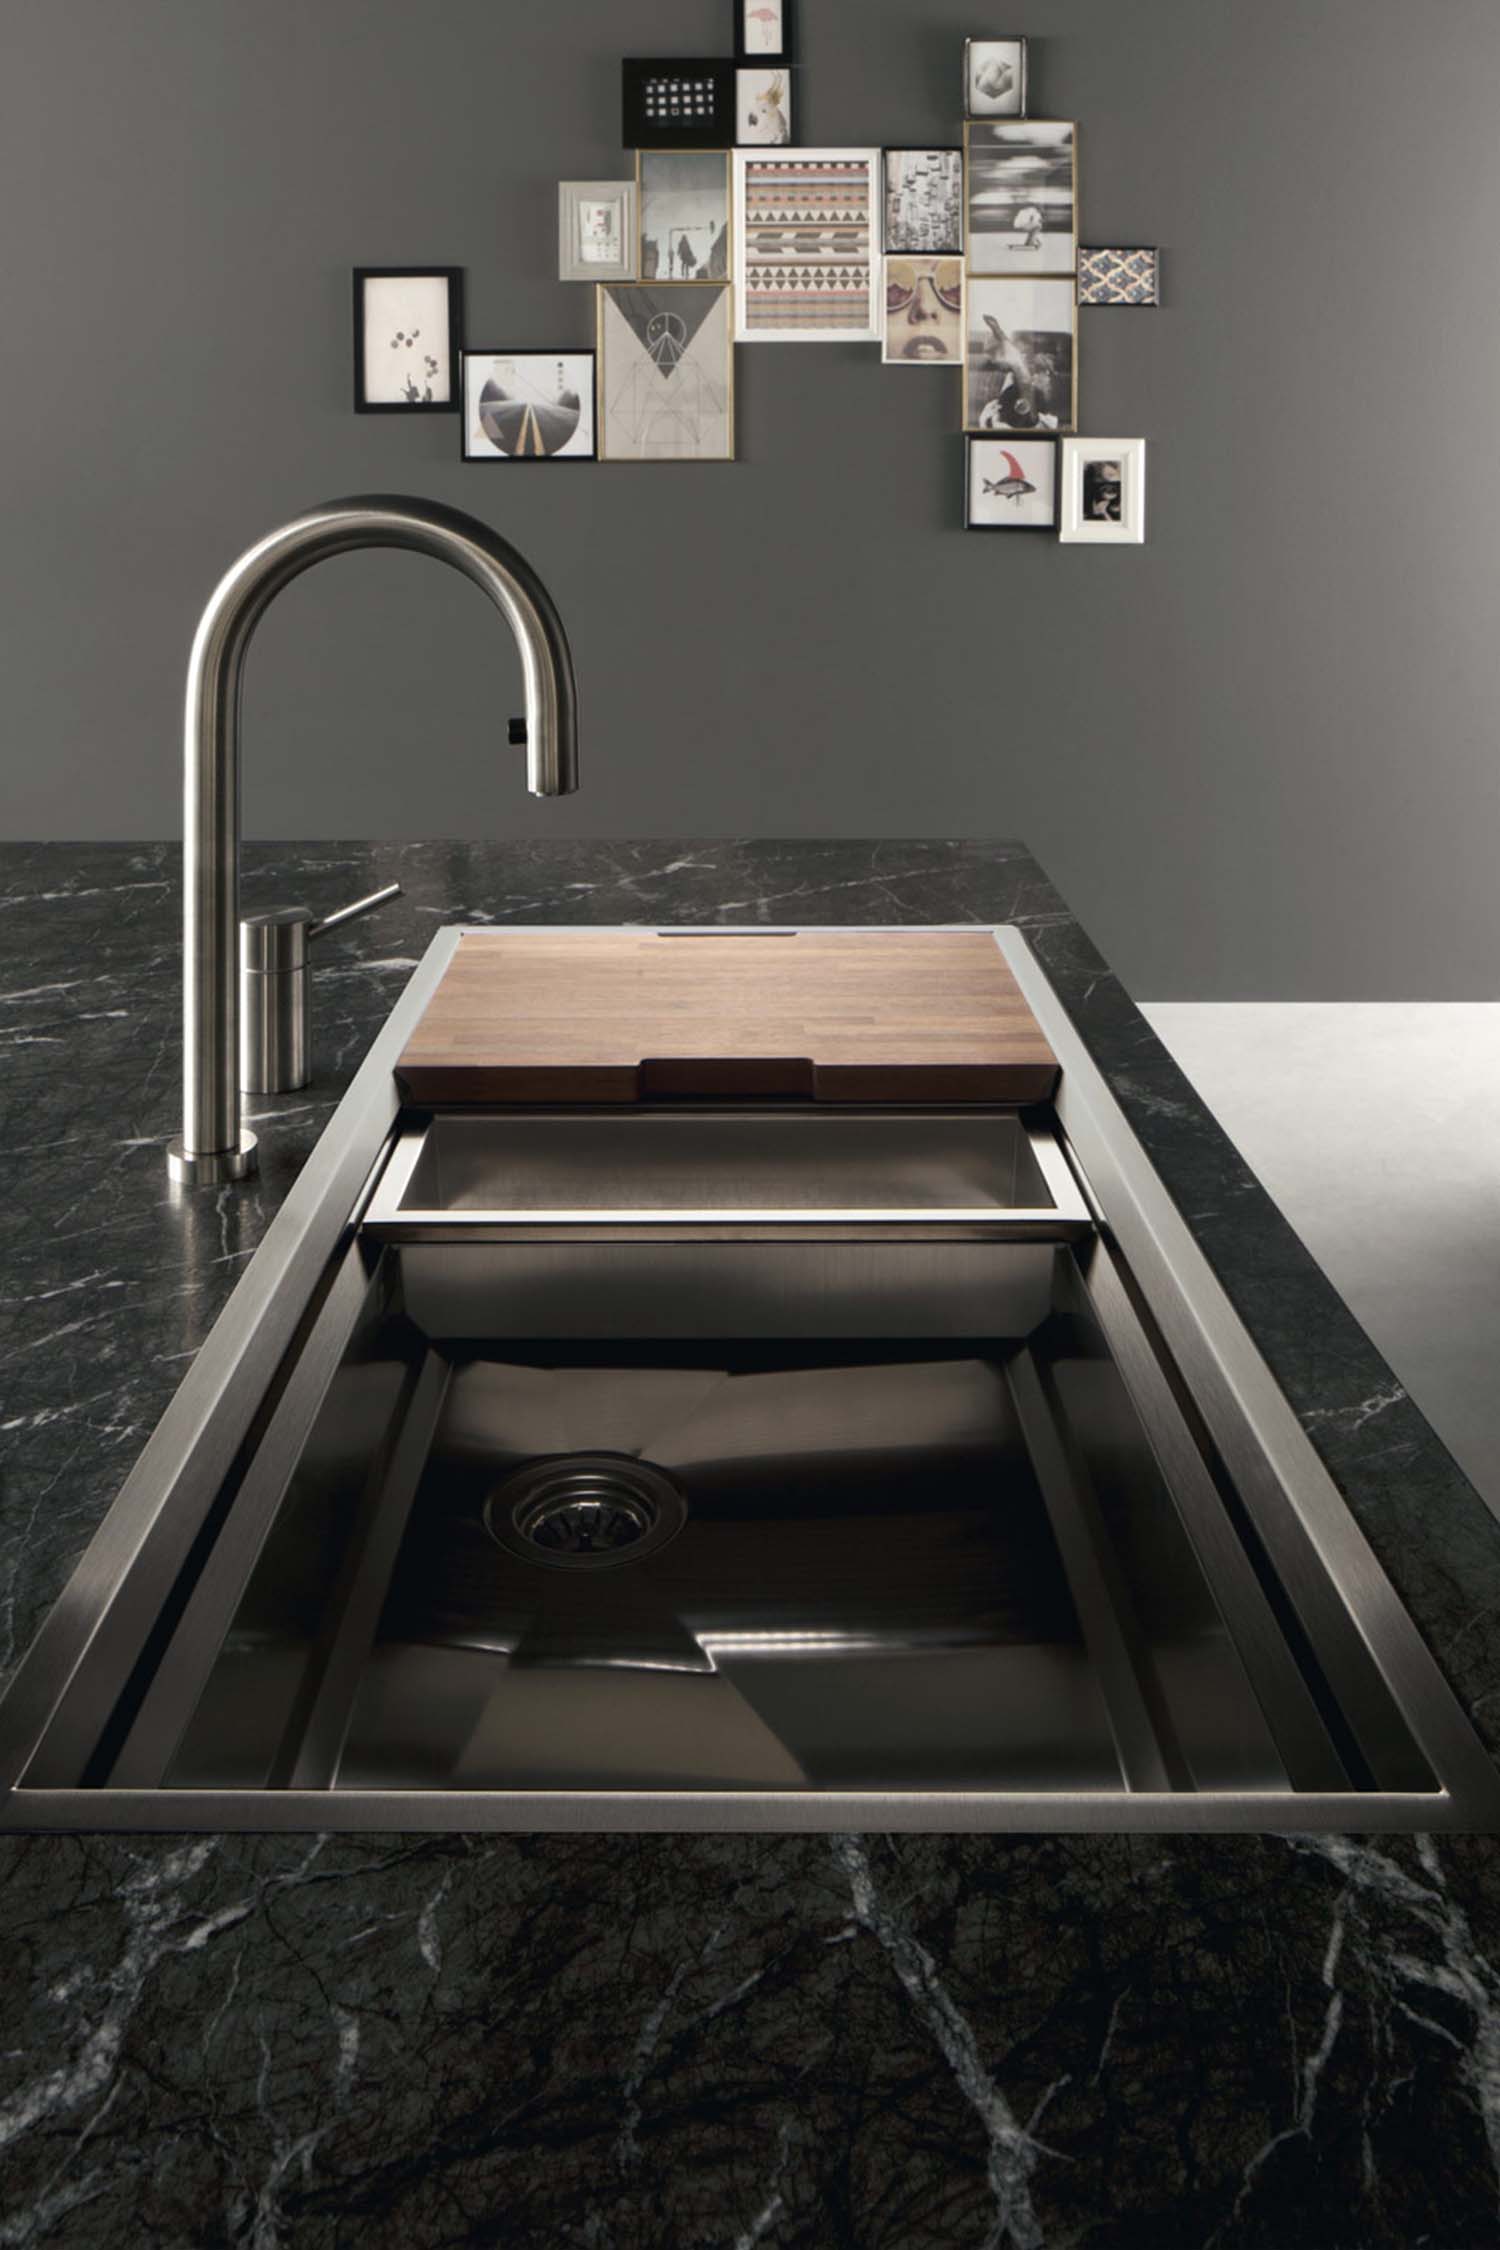 A contrasting stainless steel sink adds a jewel among the monochrome visual of factory. Additional elements slide up and down the perimeter of the sink for food preparation.